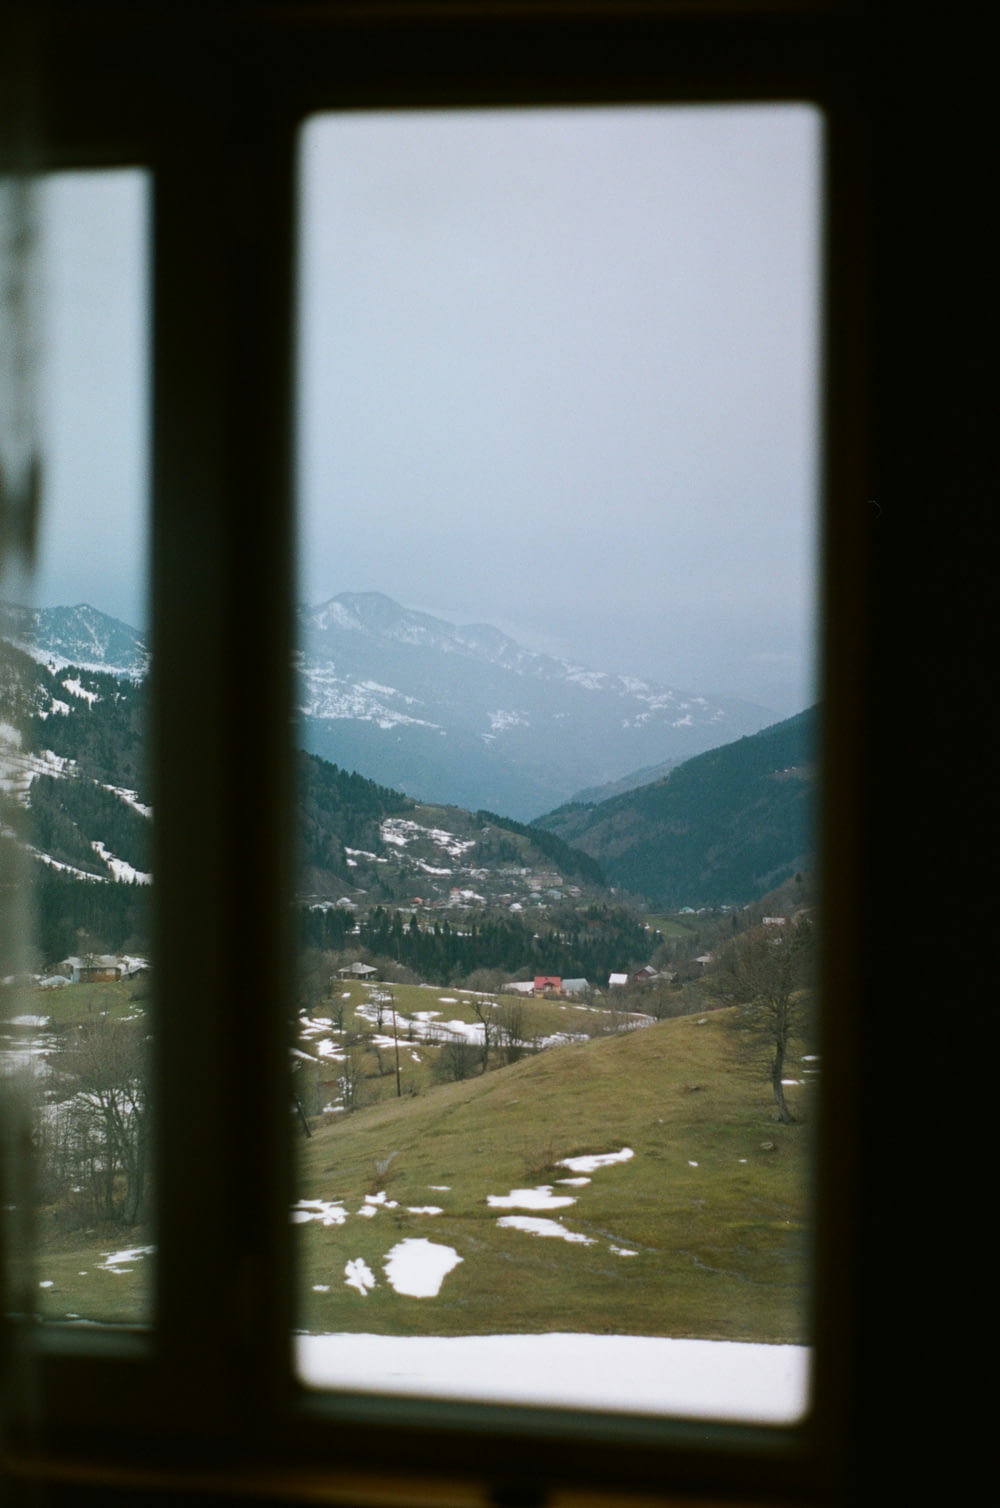 a view of a snowy mountain range from a window